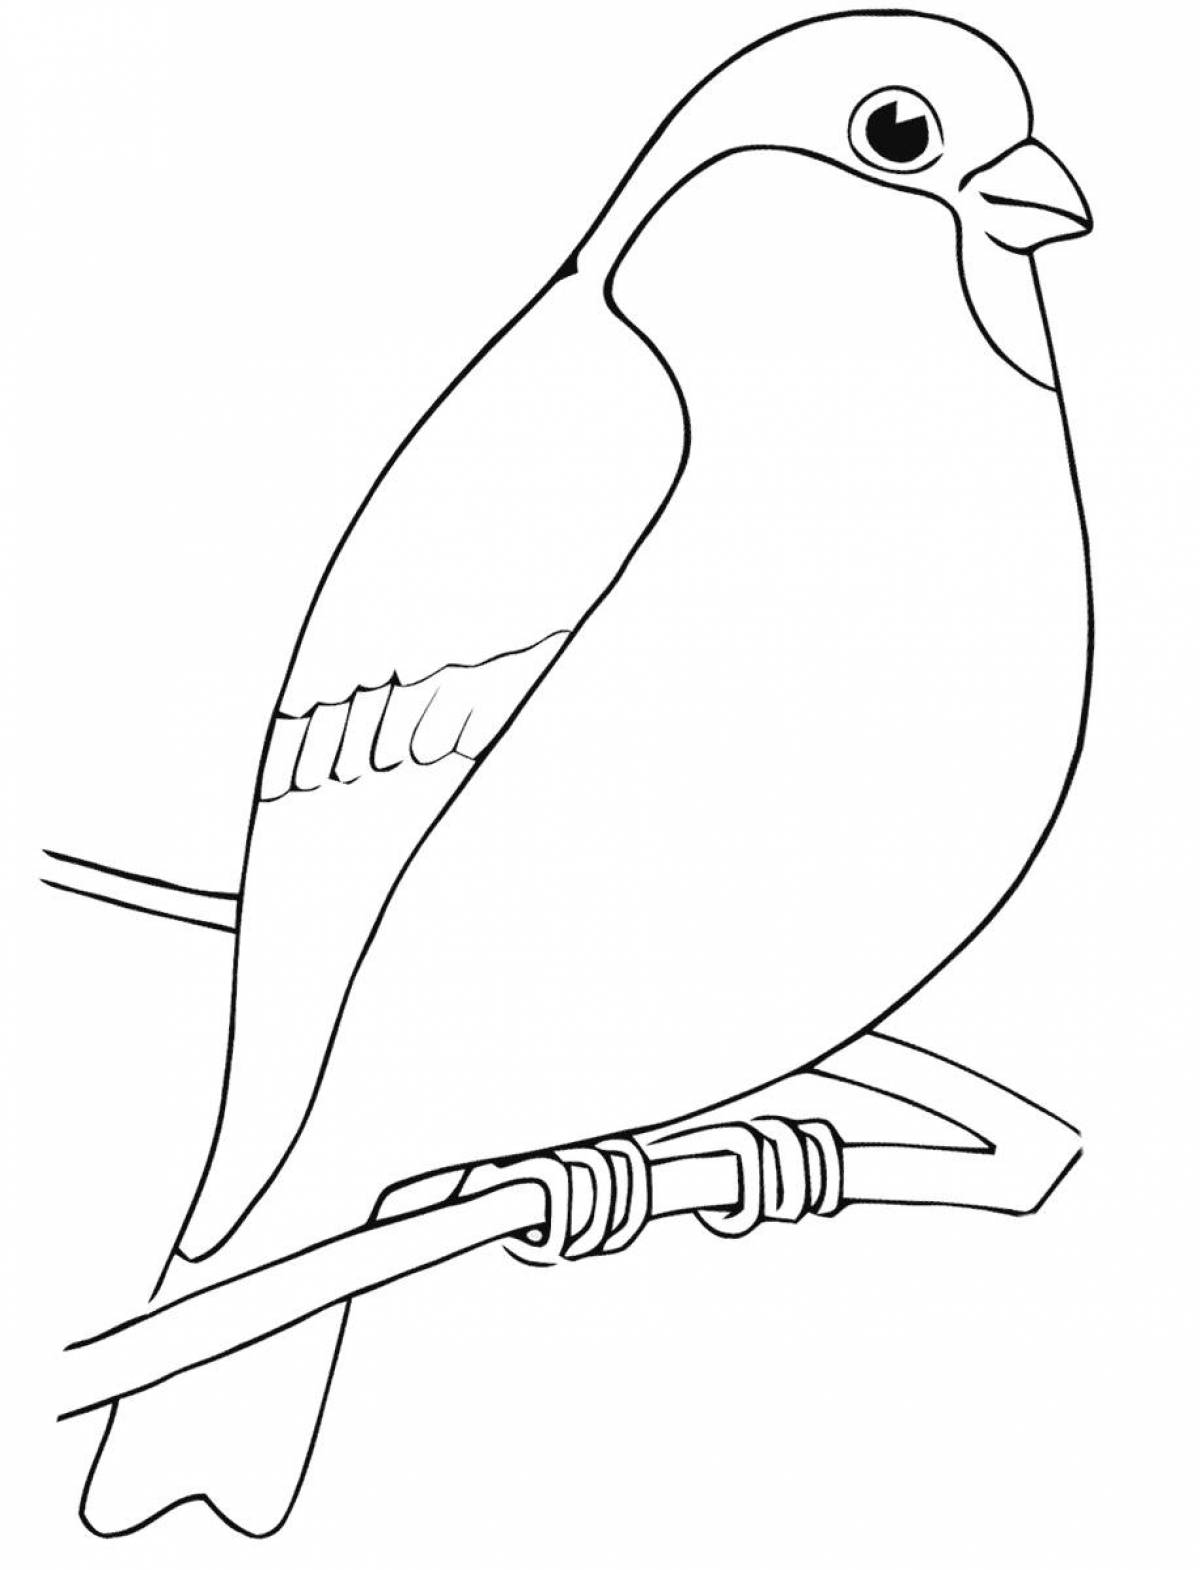 Wonderful coloring pages of wintering birds for children 3-4 years old